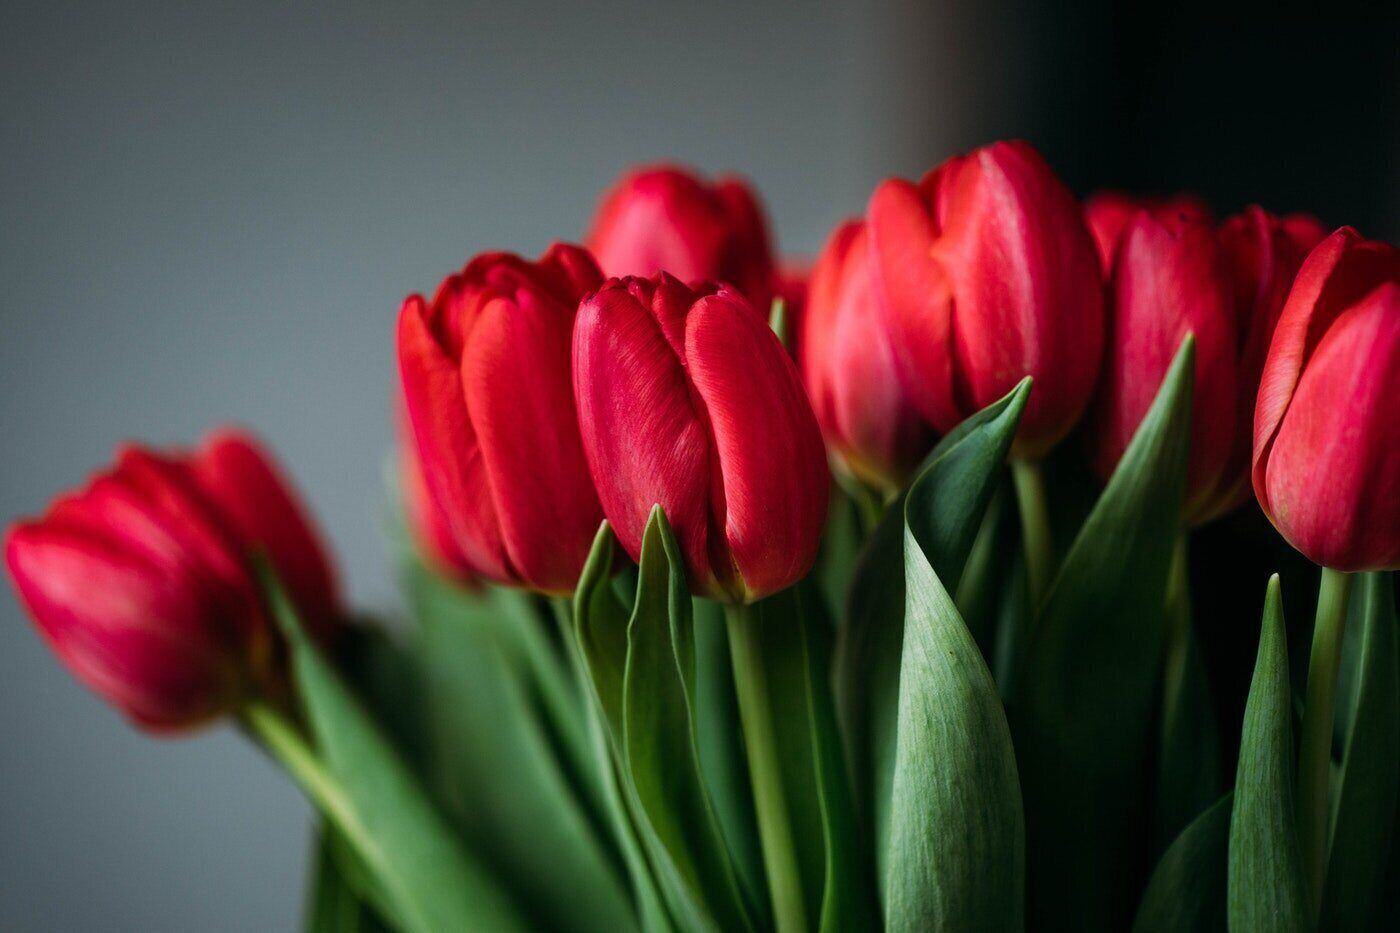 red tulips - a how to guide to giving romantic flowers